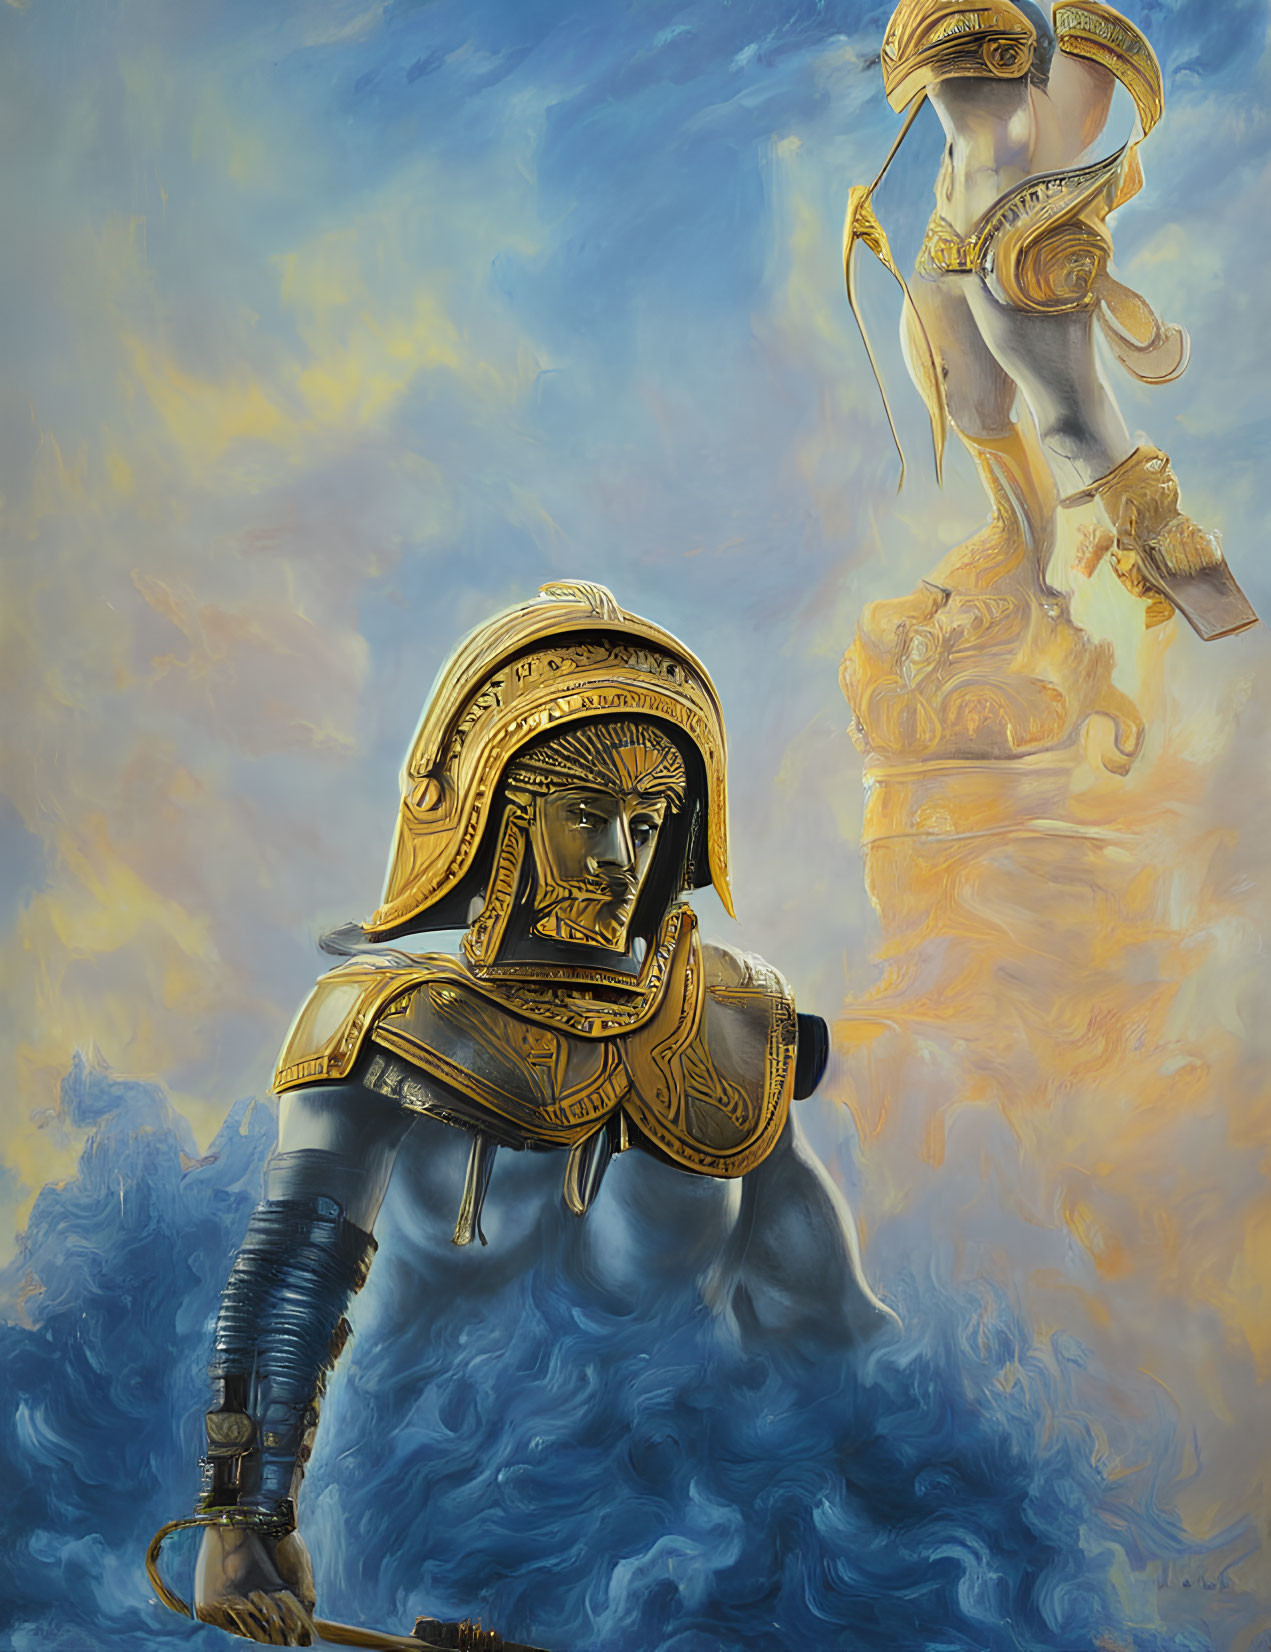 Stylized painting of warrior in golden armor with Corinthian helmet against blue and golden clouds.